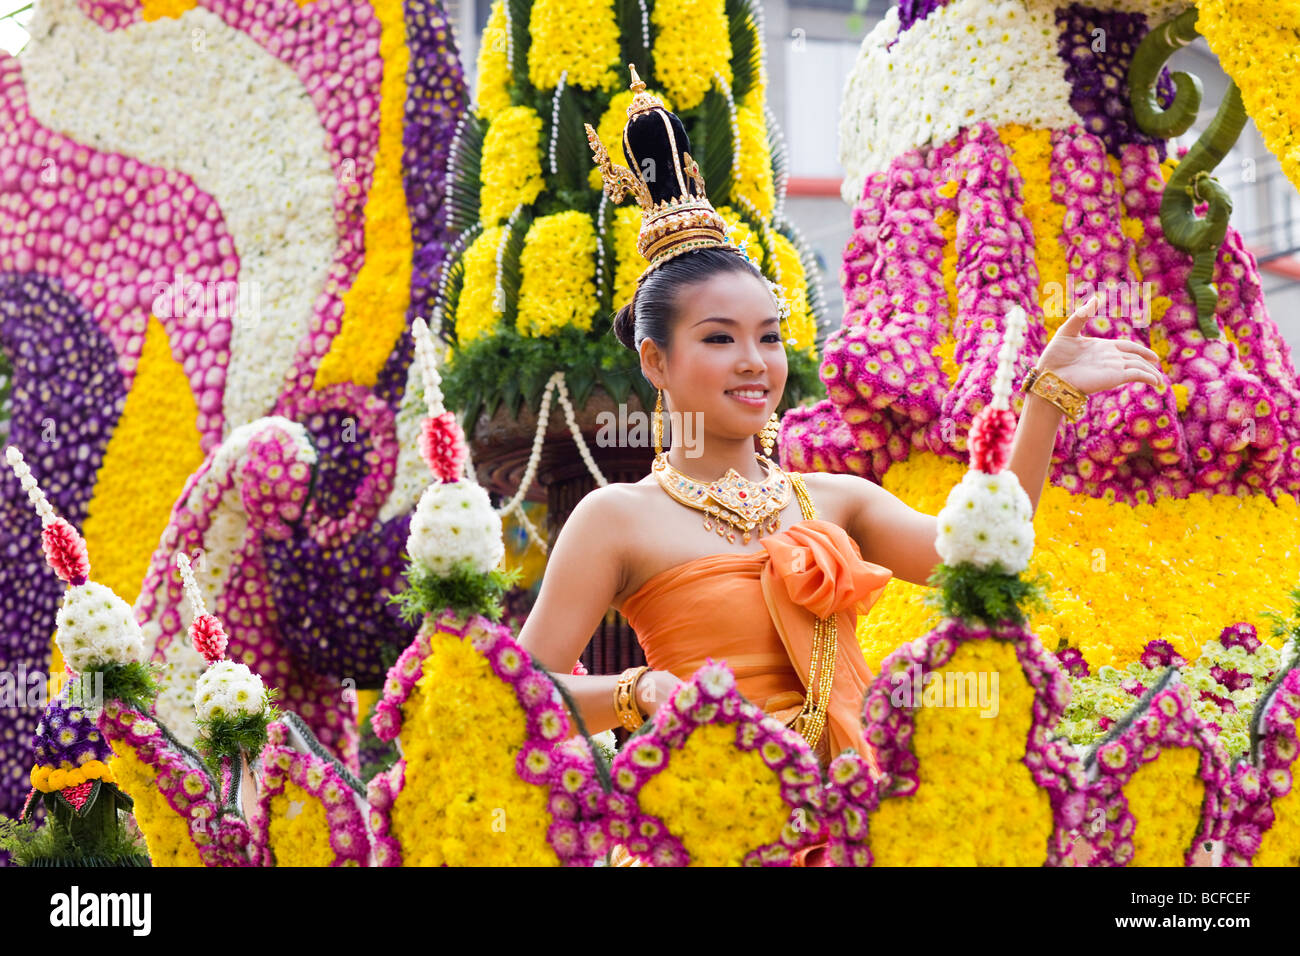 Thailand, Chiang Mai, Girl on Floral Float at Chiang Mai Flower Festival Parade Stock Photo